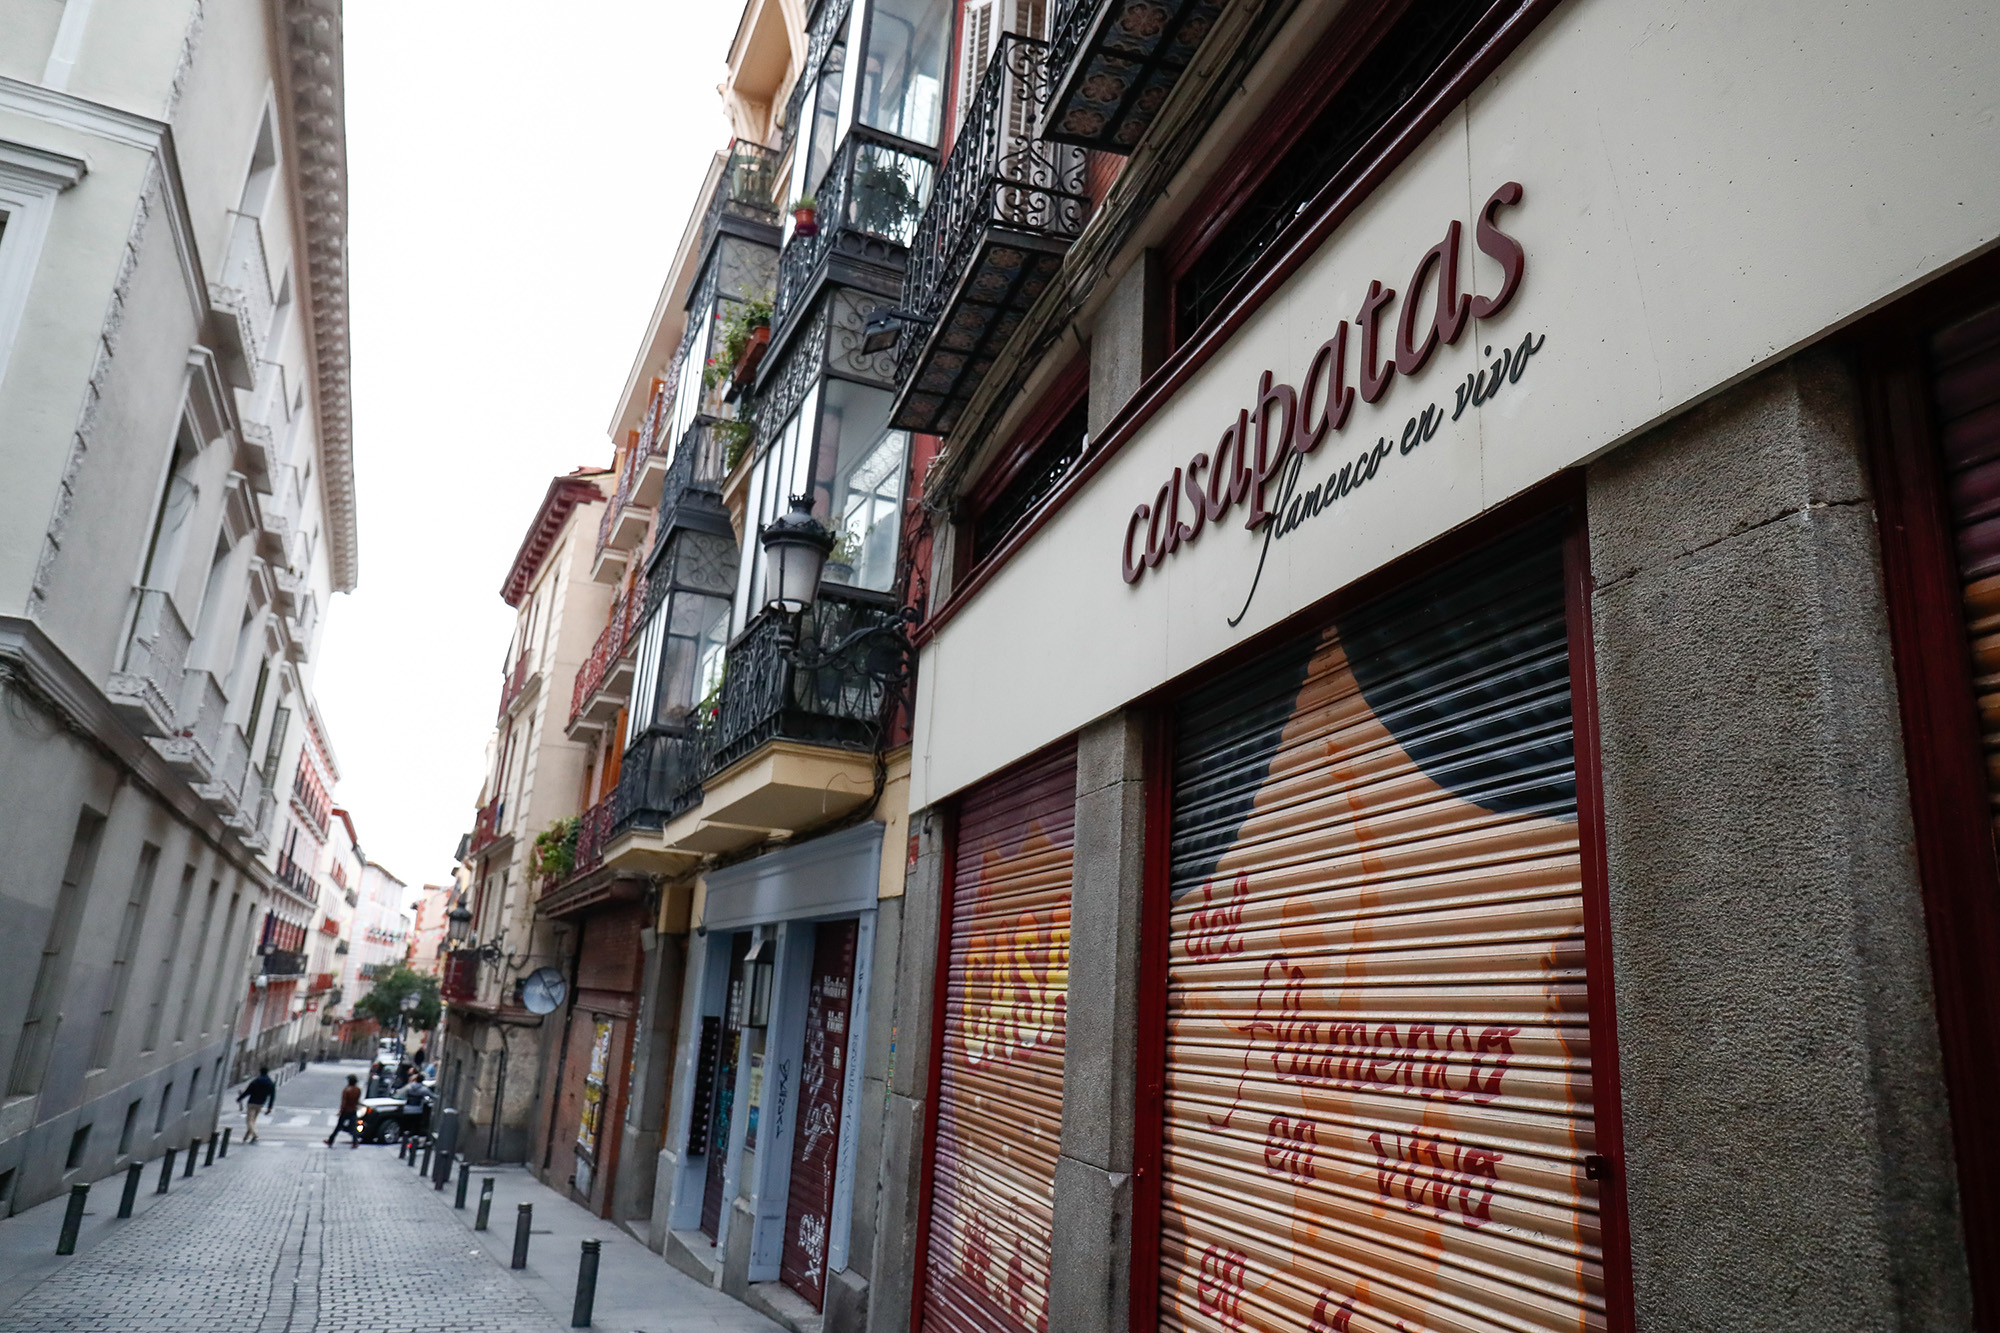 Restaurants and shops are closed due to the Covid-19 pandemic on October 28, 2020, in Madrid, Spain.